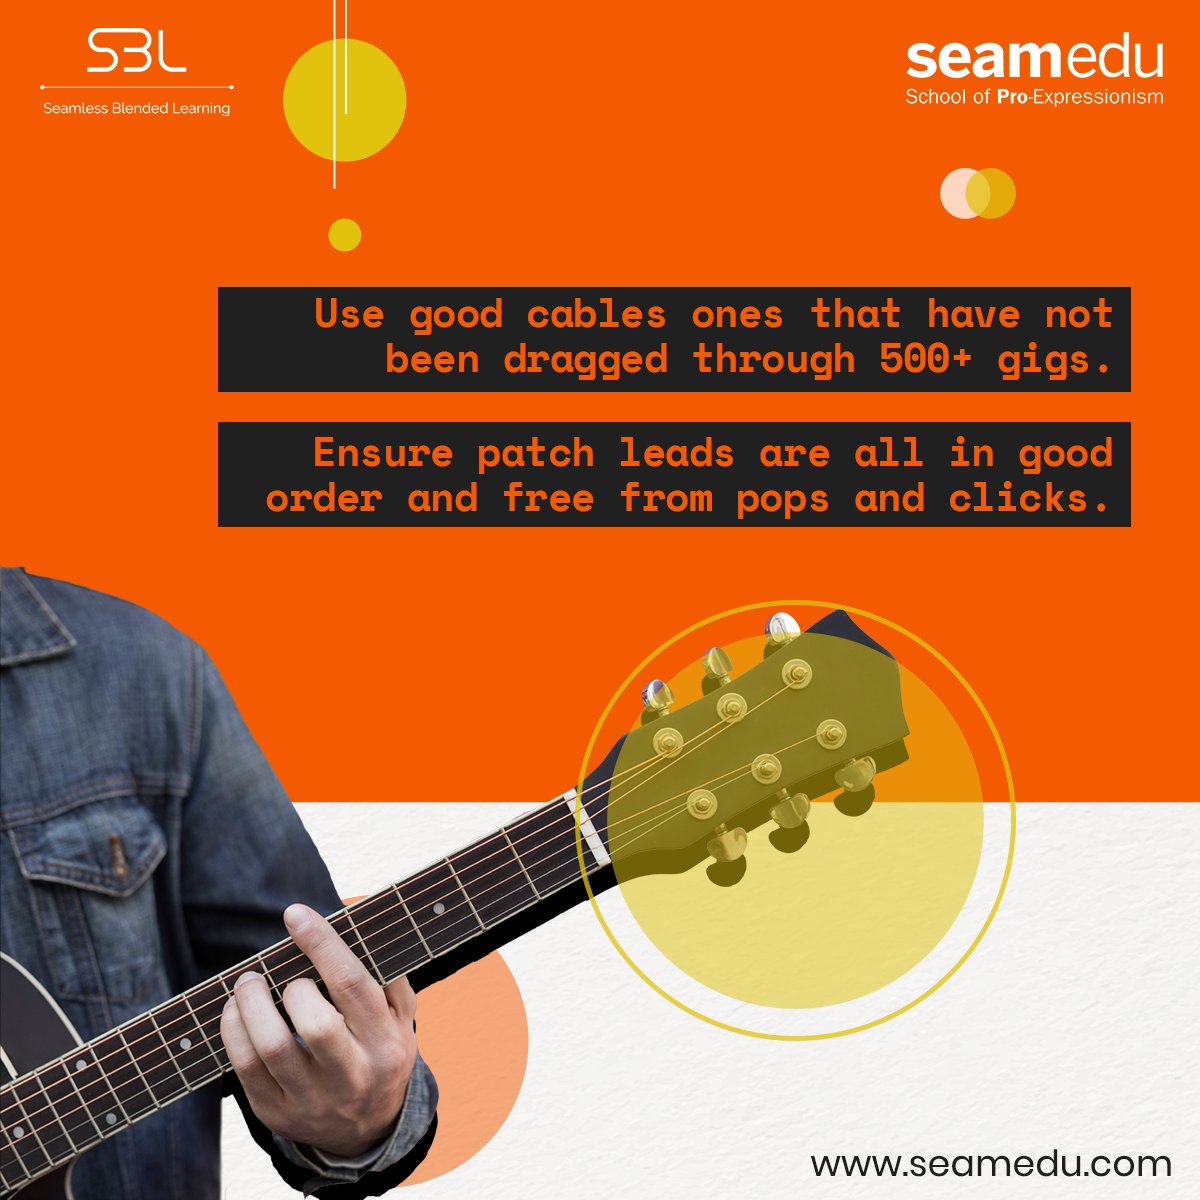 To know more about our sound engineering course visit - bit.ly/3bxzXw7.

#soundengineering #soundproduction #Seamedu #SBL #SeamlessBlendedLearning #SeamlessLearning #MediaSchool #School #MediaInstitute #Academy #SeamlessBlendedLearning #SBL #Pune #Bangalore #Chandigarh